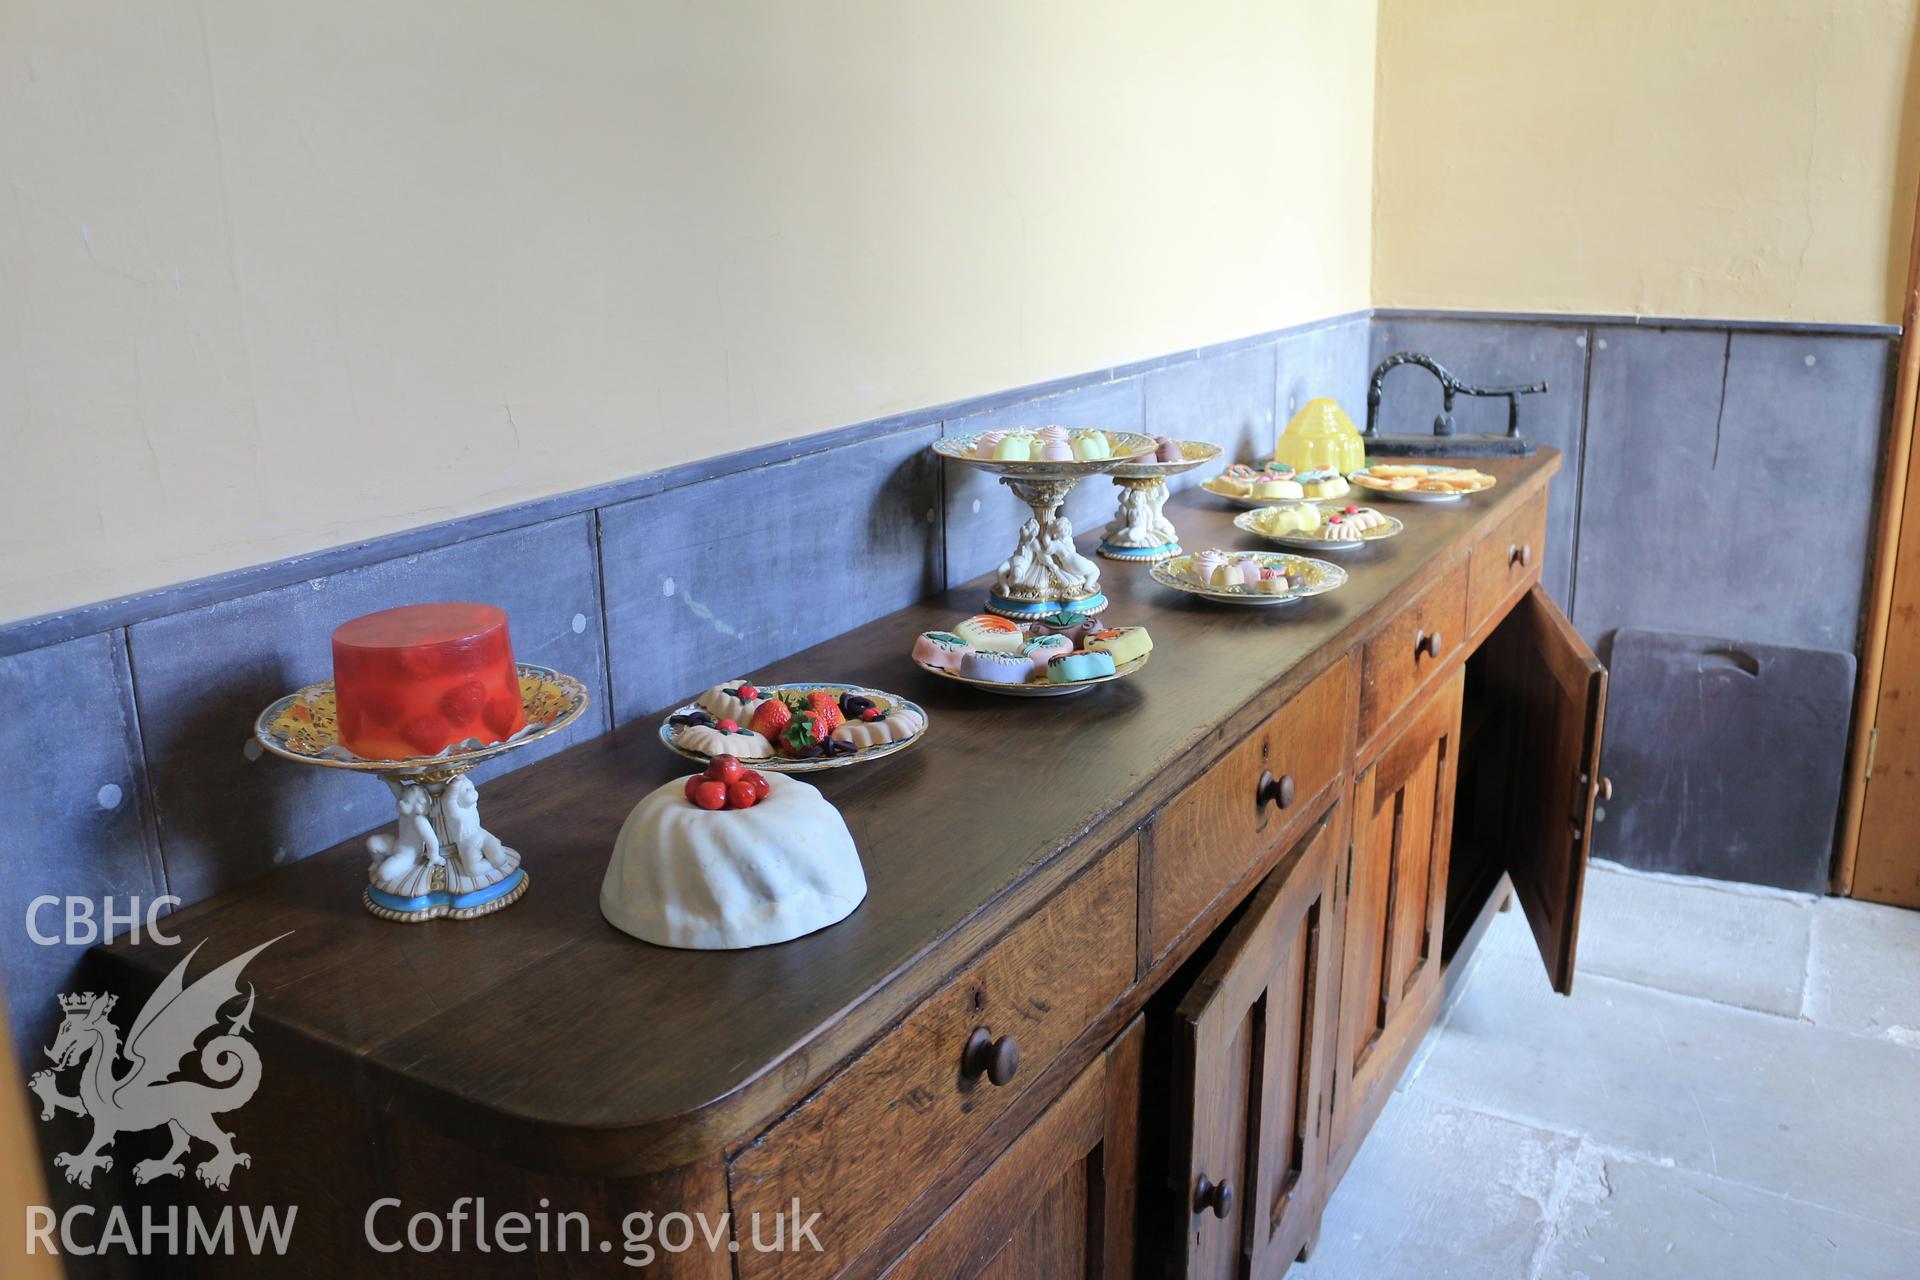 Photographic survey of Penrhyn Castle, Bangor Kitchens, display of desserts (wax models)